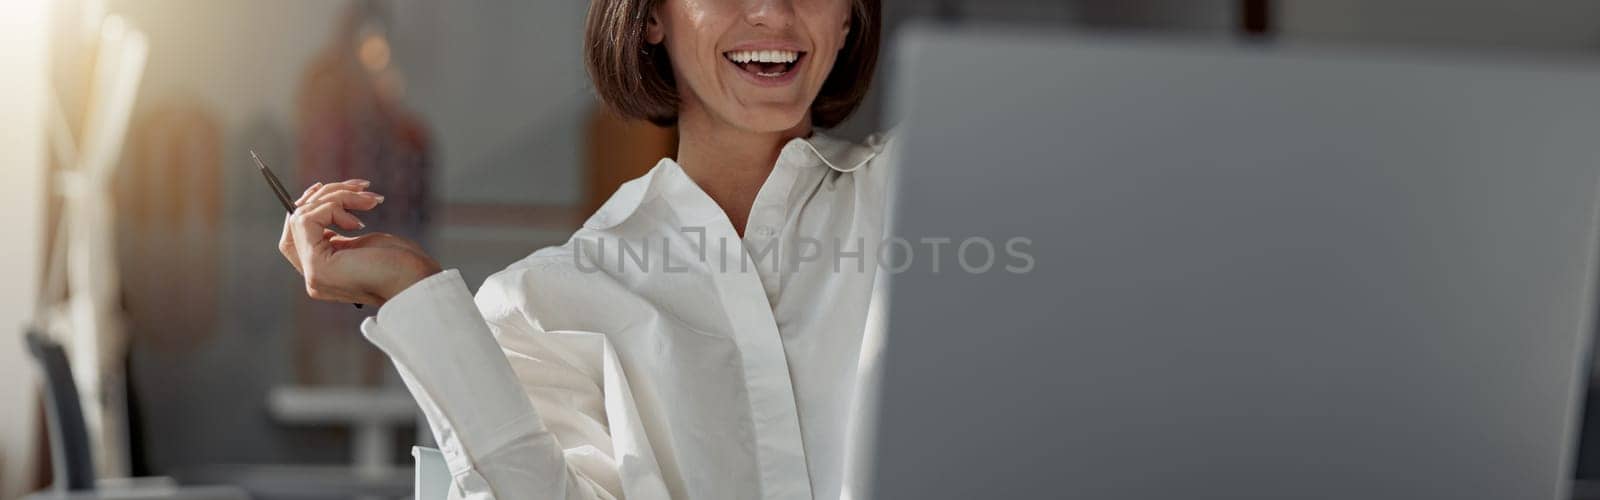 Smiling business woman working laptop while sitting in modern office. Blurred background